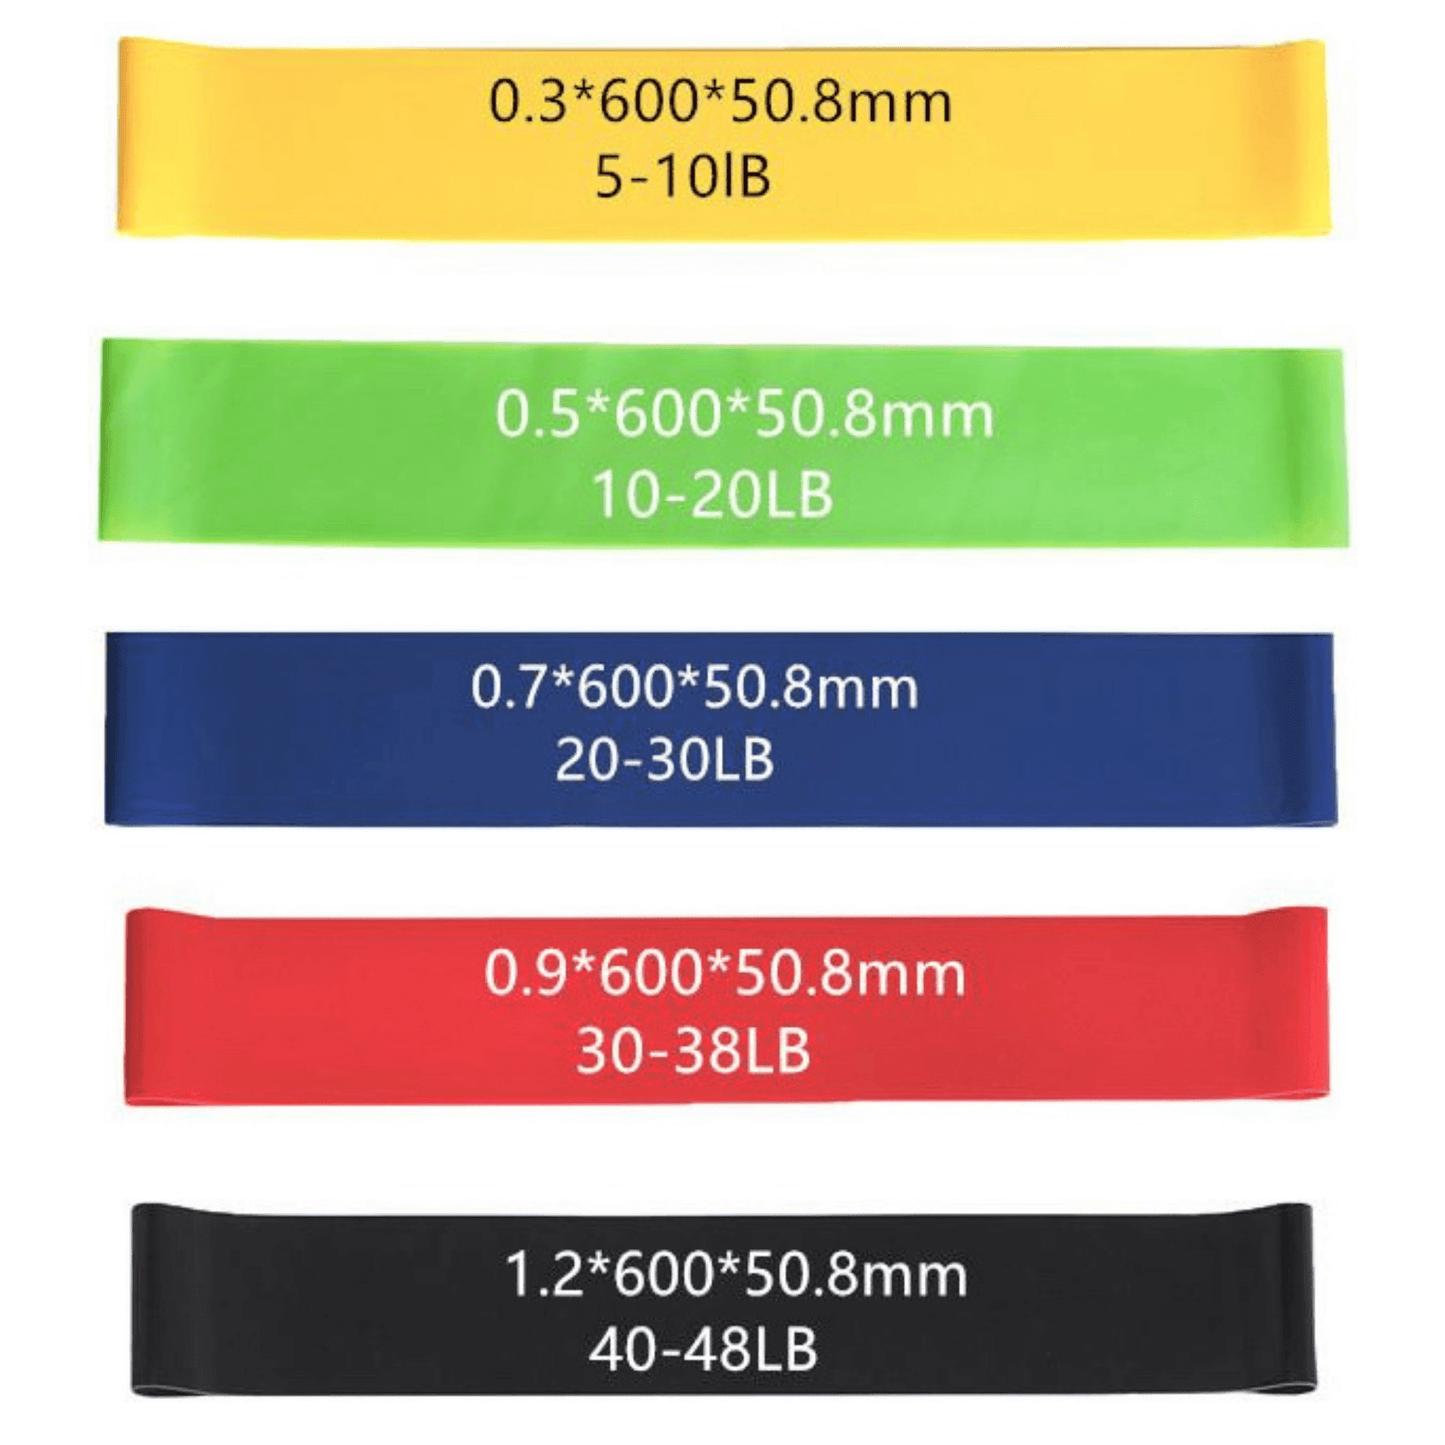 5 Piece Set of Resistance Body Bands with Carry Bag